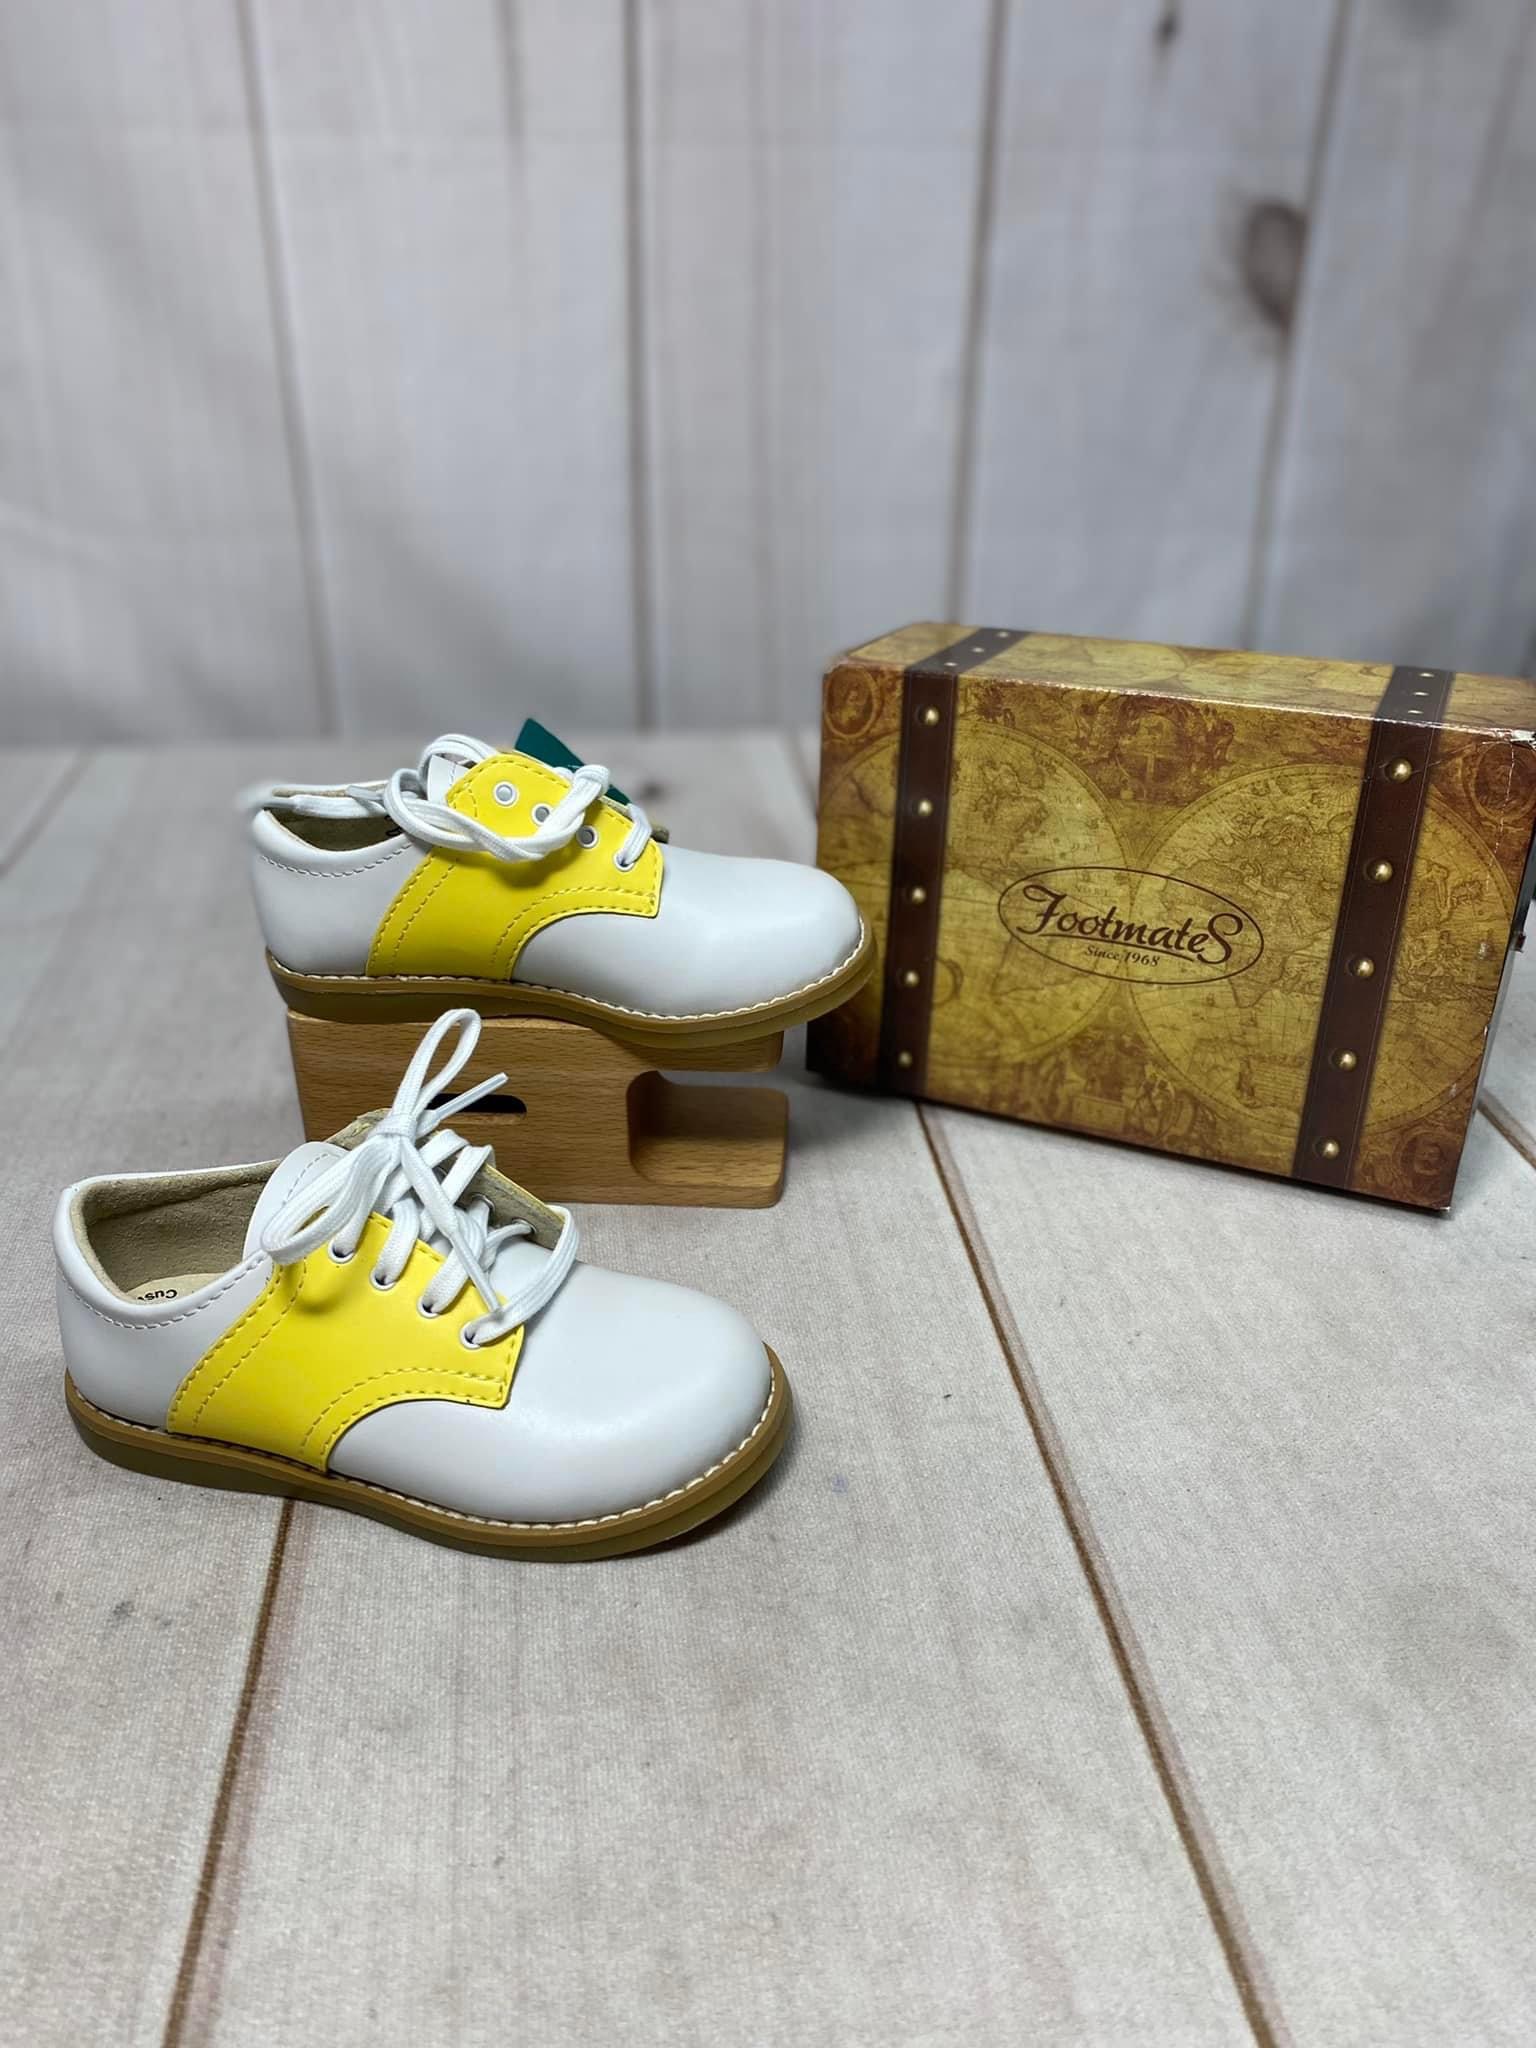 Footmates Shoes - New in Box!
White with Yellow (Sunbeam)
Size: Little Kid 8
Has inserts for Medium & Wide Widths
Leather with Rubber Soles